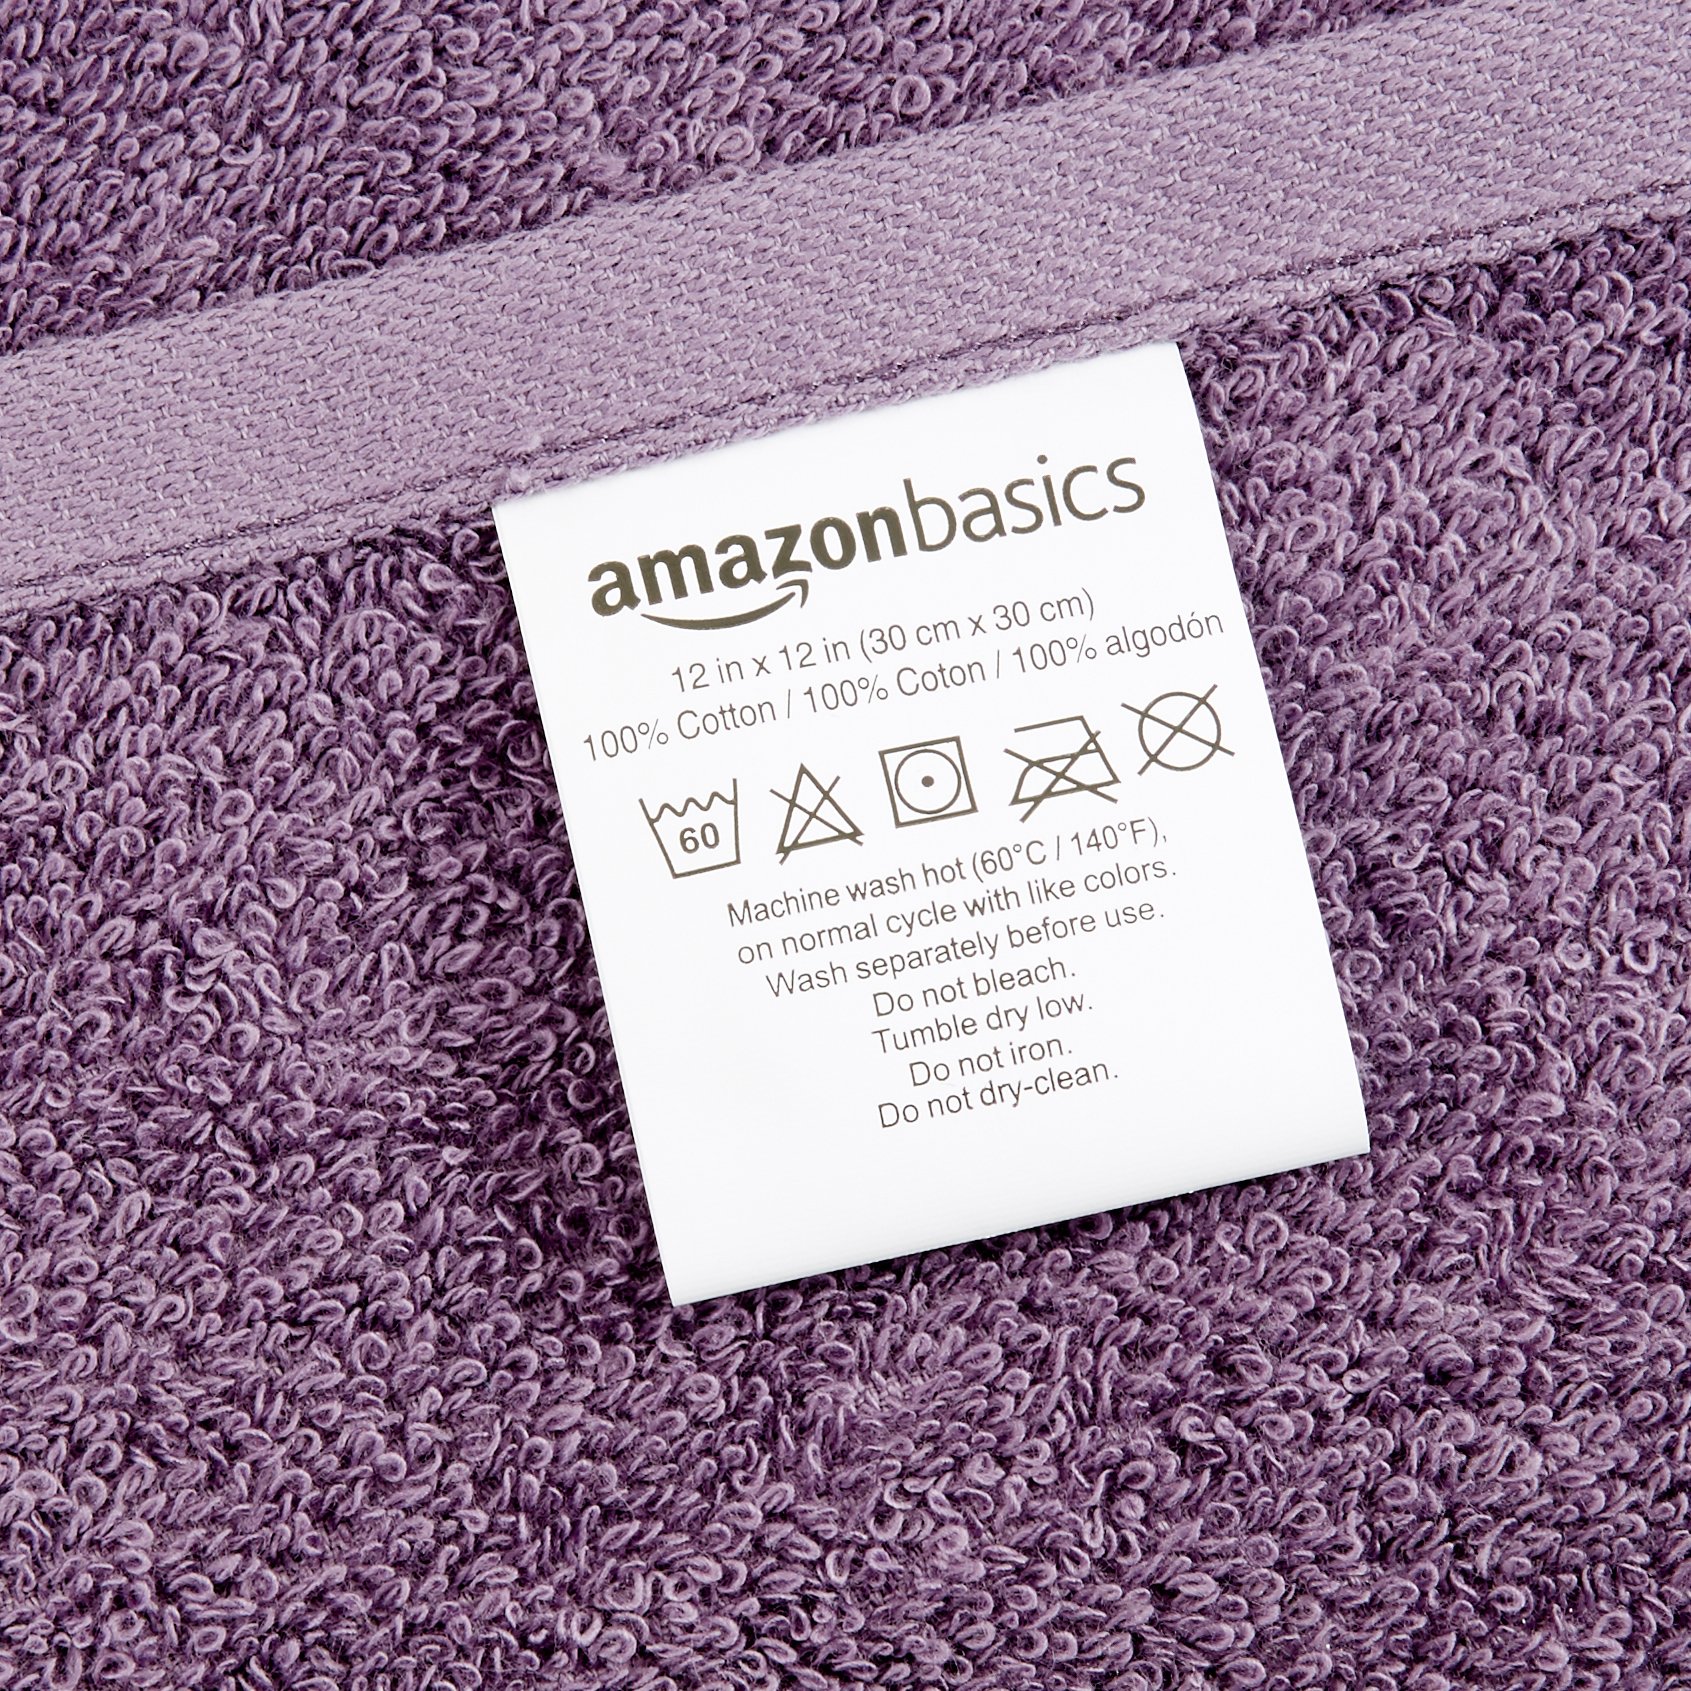 Amazon Basics Fast Drying, Extra Absorbent, Terry Cotton Washcloths - Pack of 24, Petal Pink/Lavender/White, 12 x 12-Inch